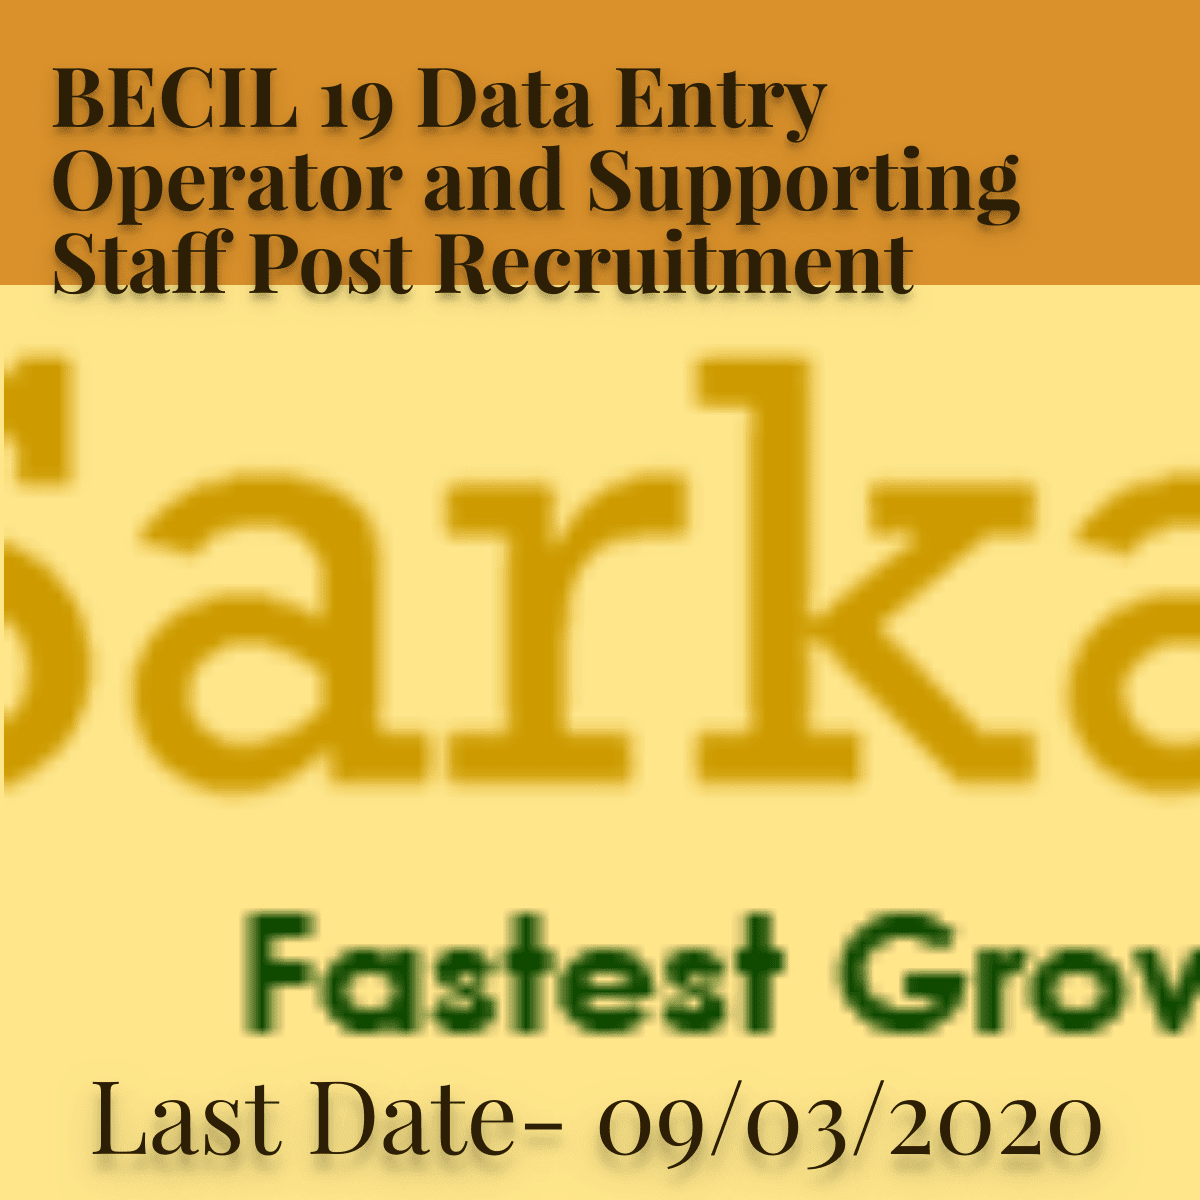 BECIL Recruitment 2020 for Data Entry Operator and Supporting Staff Post